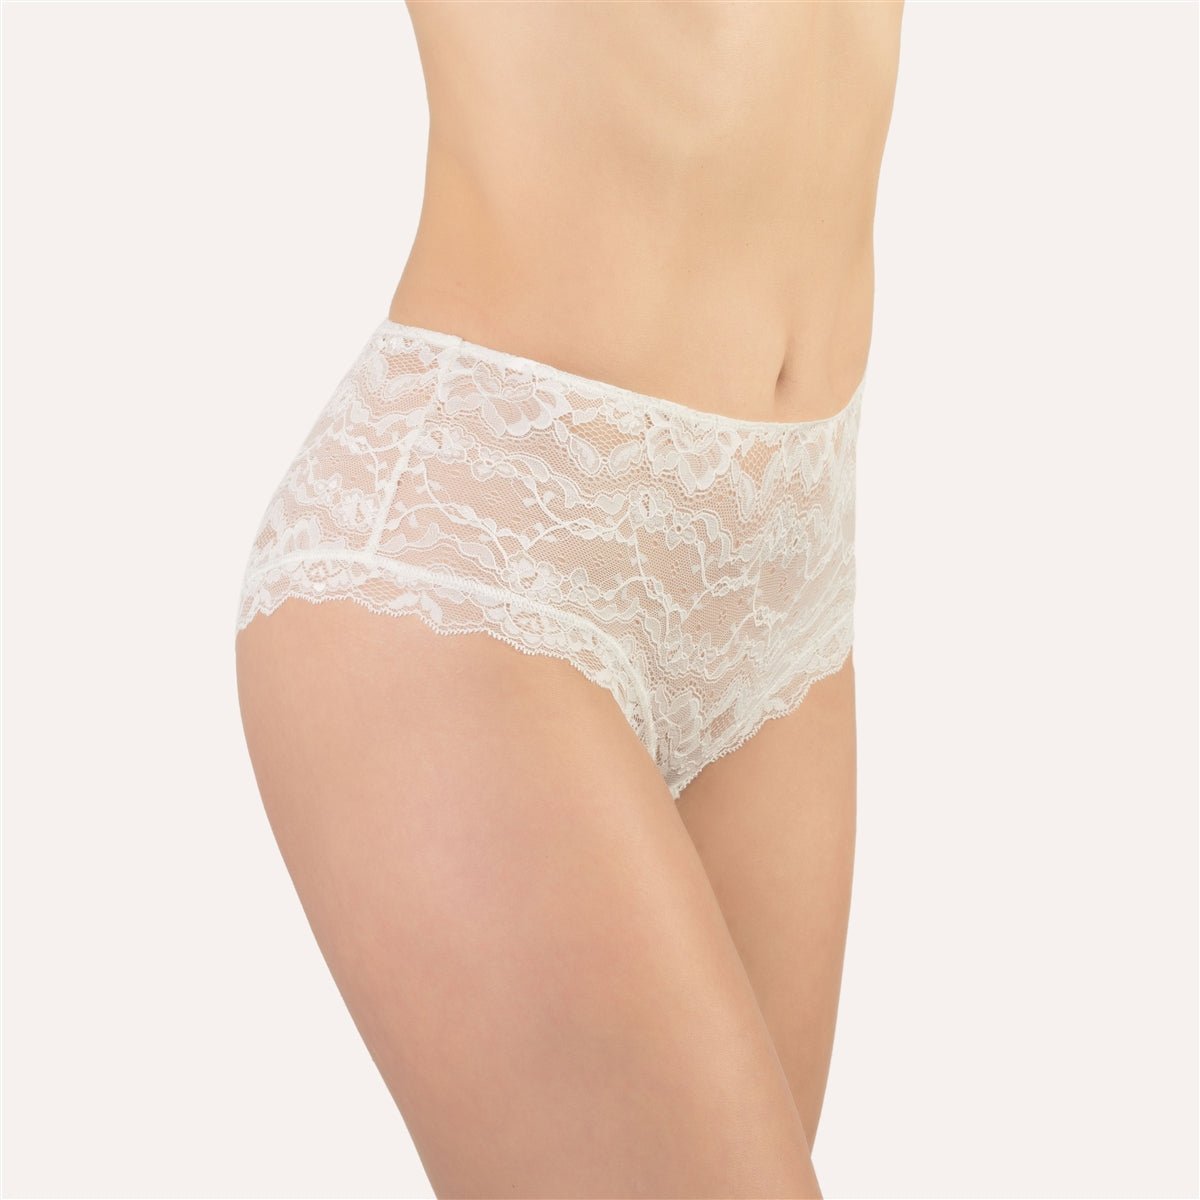 Beautiful ivory all lace shorty style brief made in Italy